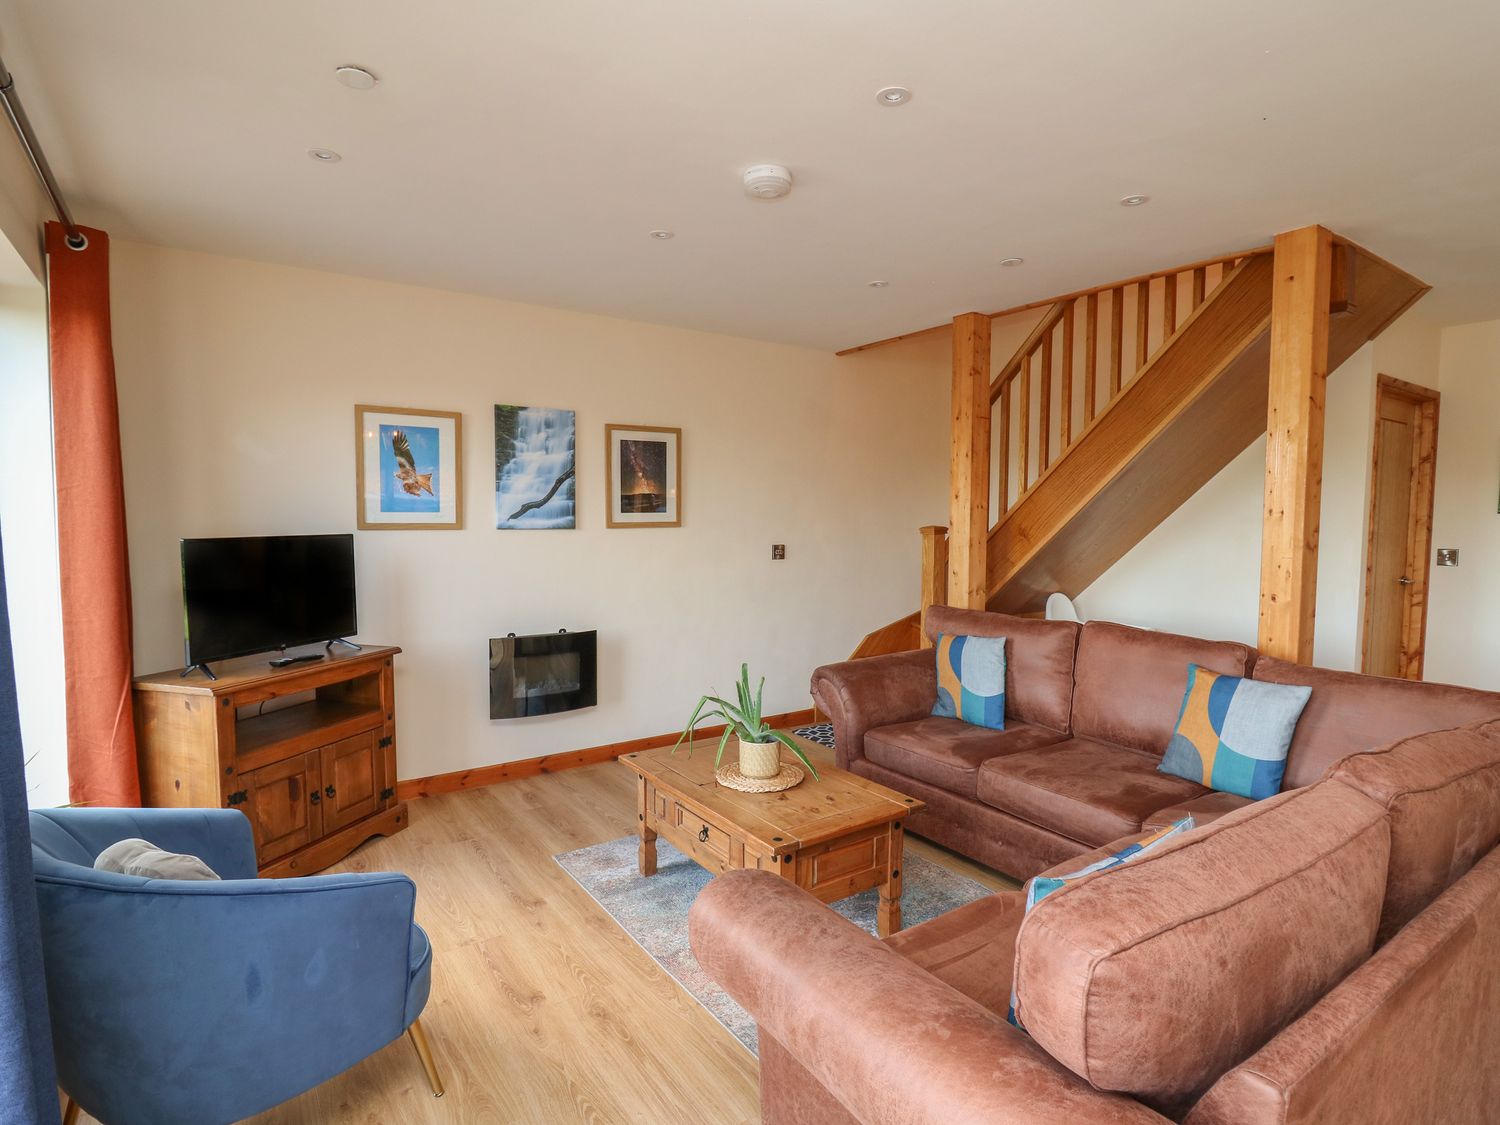 Harp Meadow, Presteigne, Powys. Three-bedroom home with hot tub and enclosed garden. Rural. Stylish.